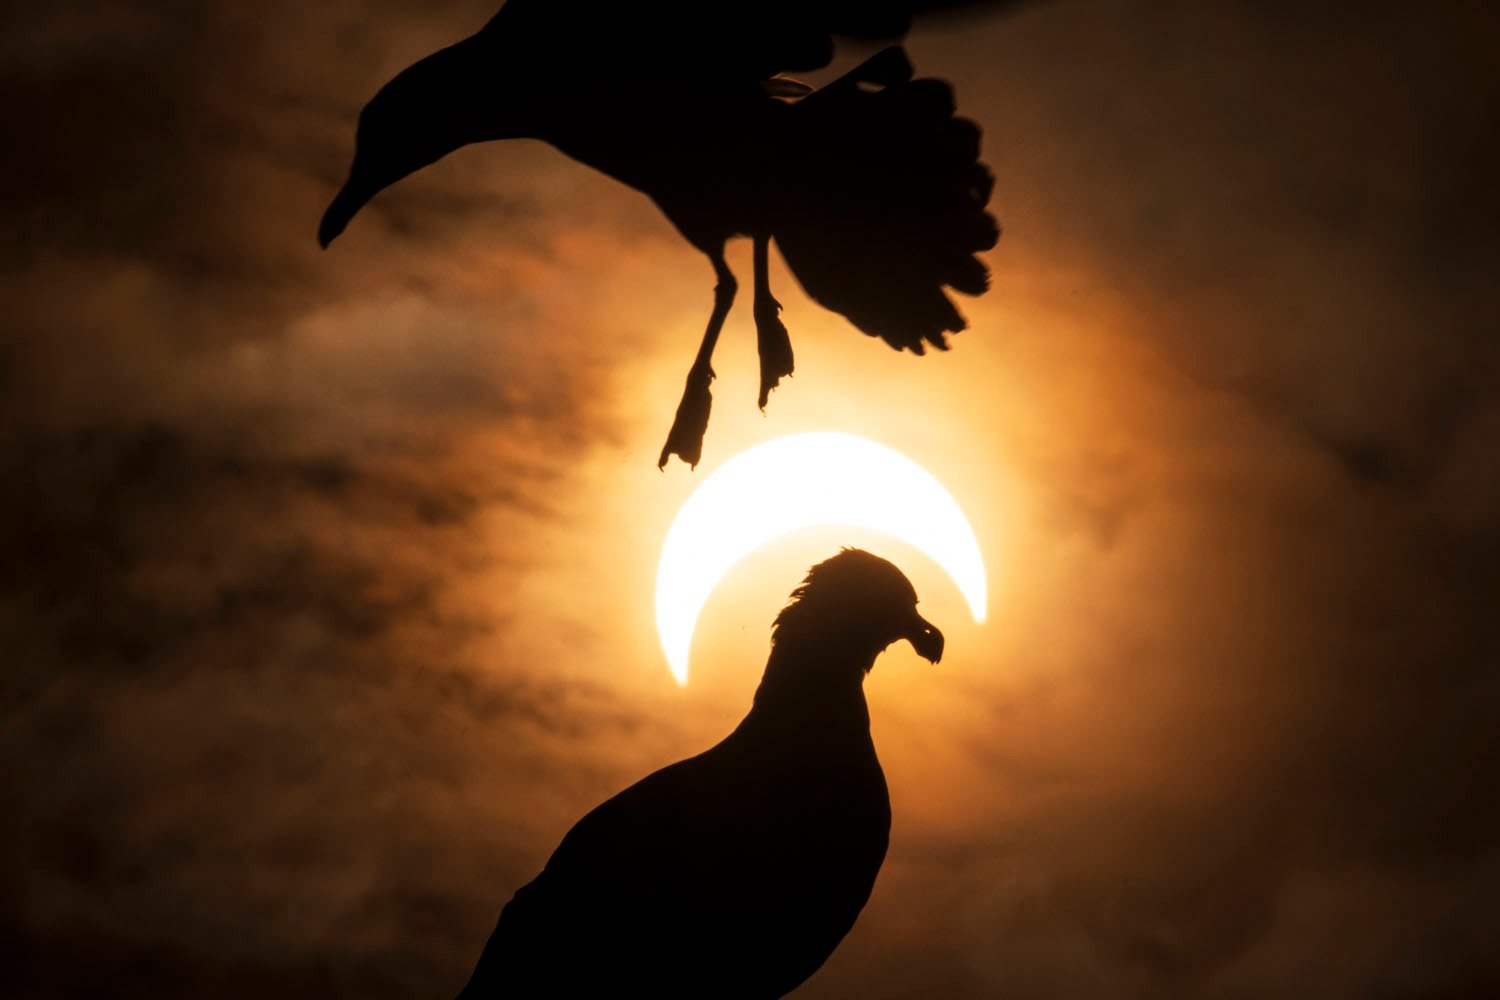 Silhouette of two doves flying during a violent solar eclipse, one of which partially overlaps the glowing sun.